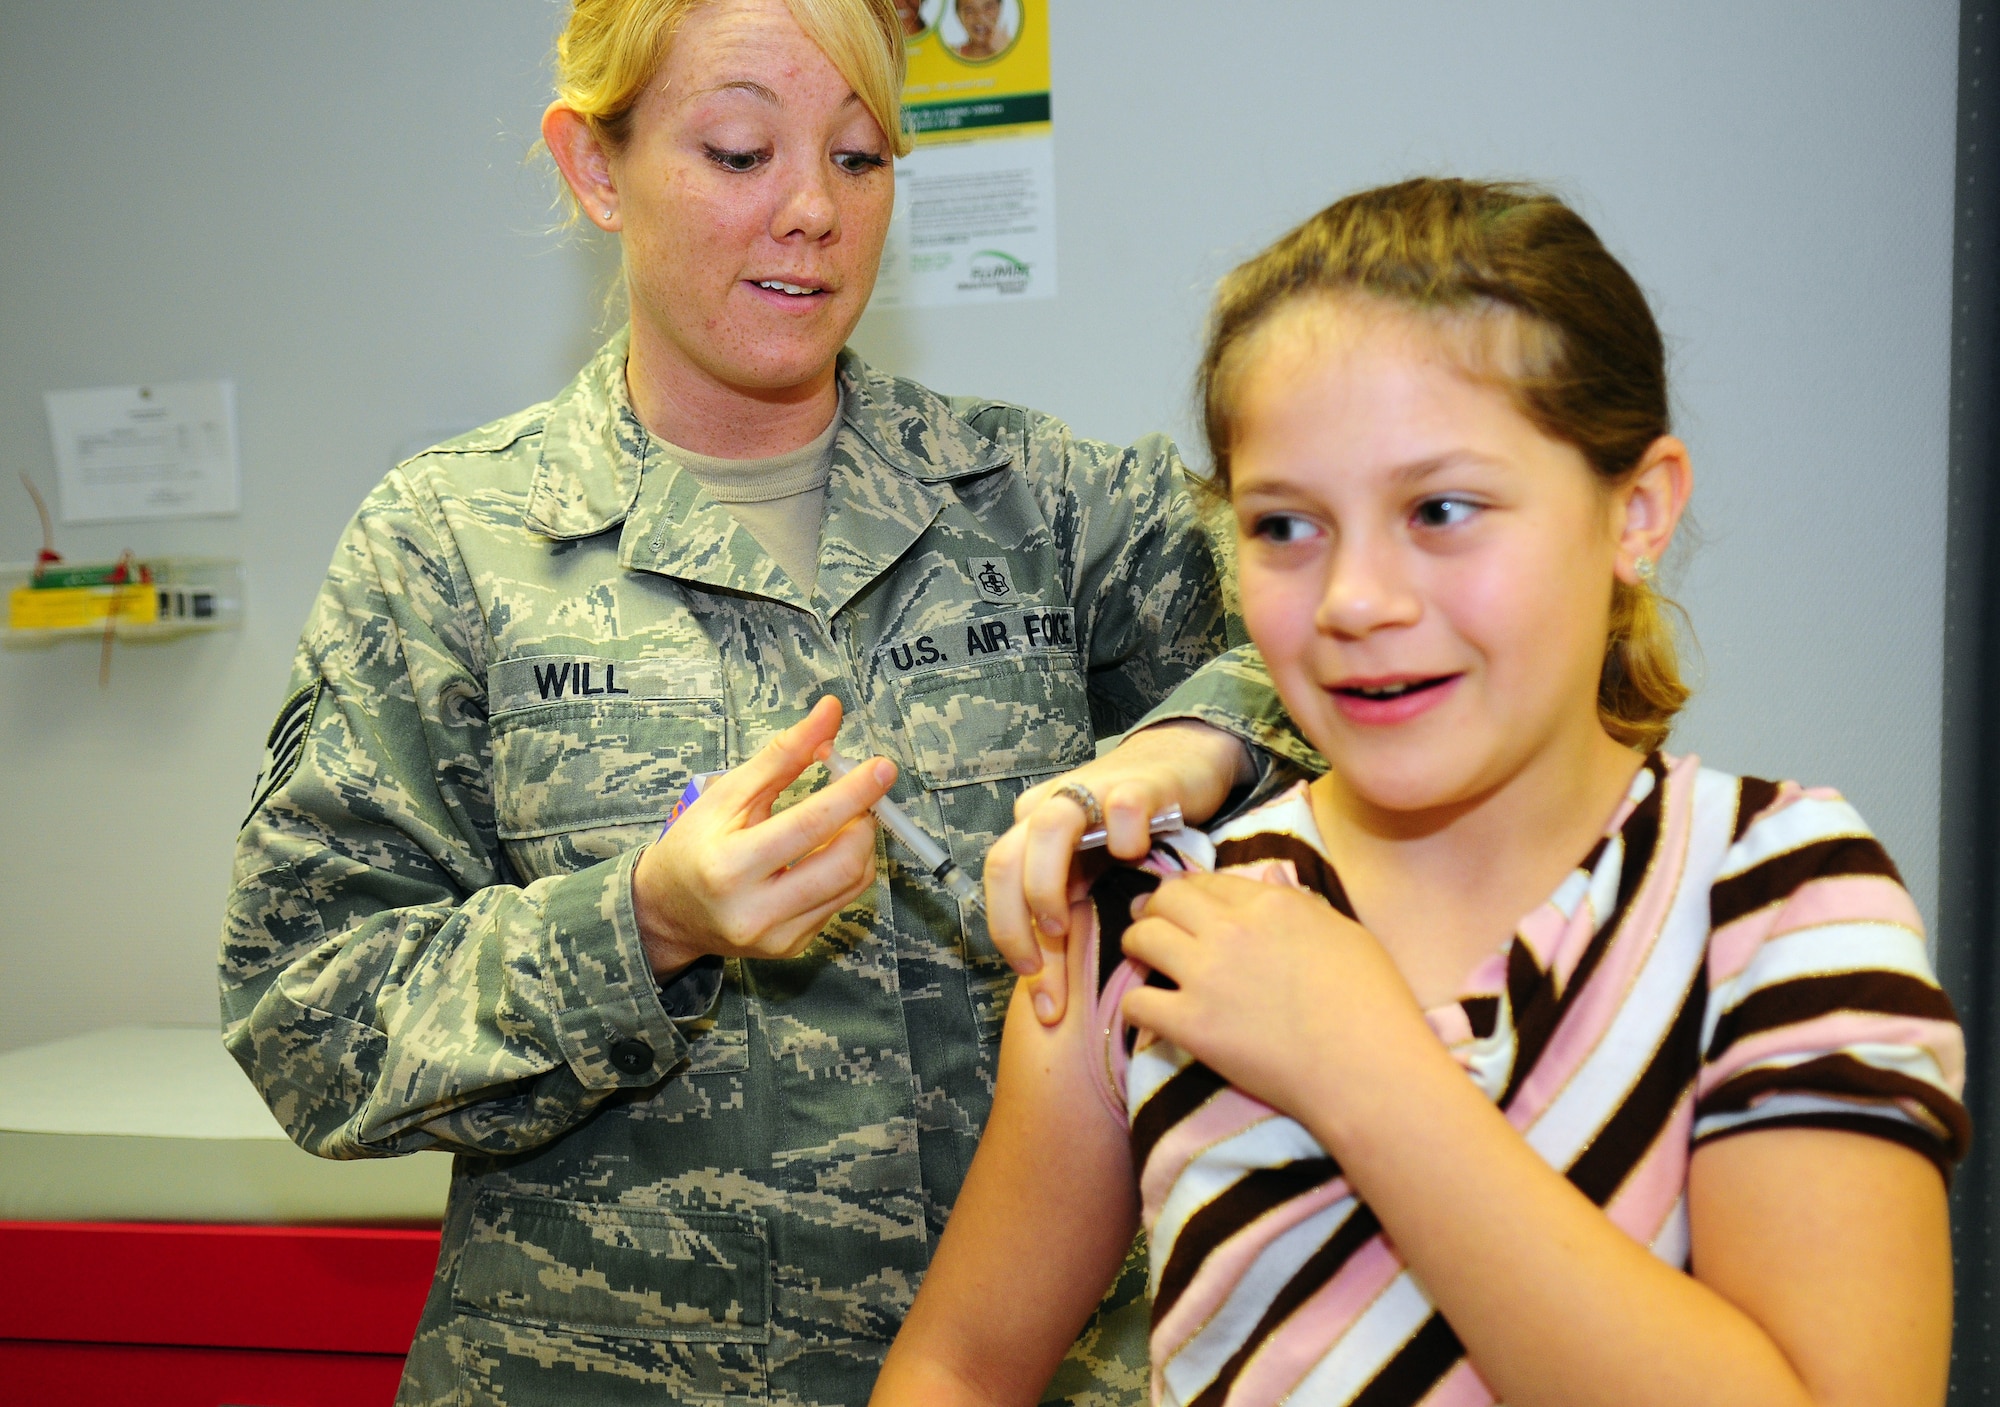 U.S. Air Force Staff Sgt. Amanda Will, a medical technician with the 86th Medical Group, gives an immunization shot to Alexandra Swift in preparation for the new school year, Ramstein Air Base, Germany, Aug. 26, 2009. (U.S. Air Force photo by Staff Sgt. Jocelyn Rich)